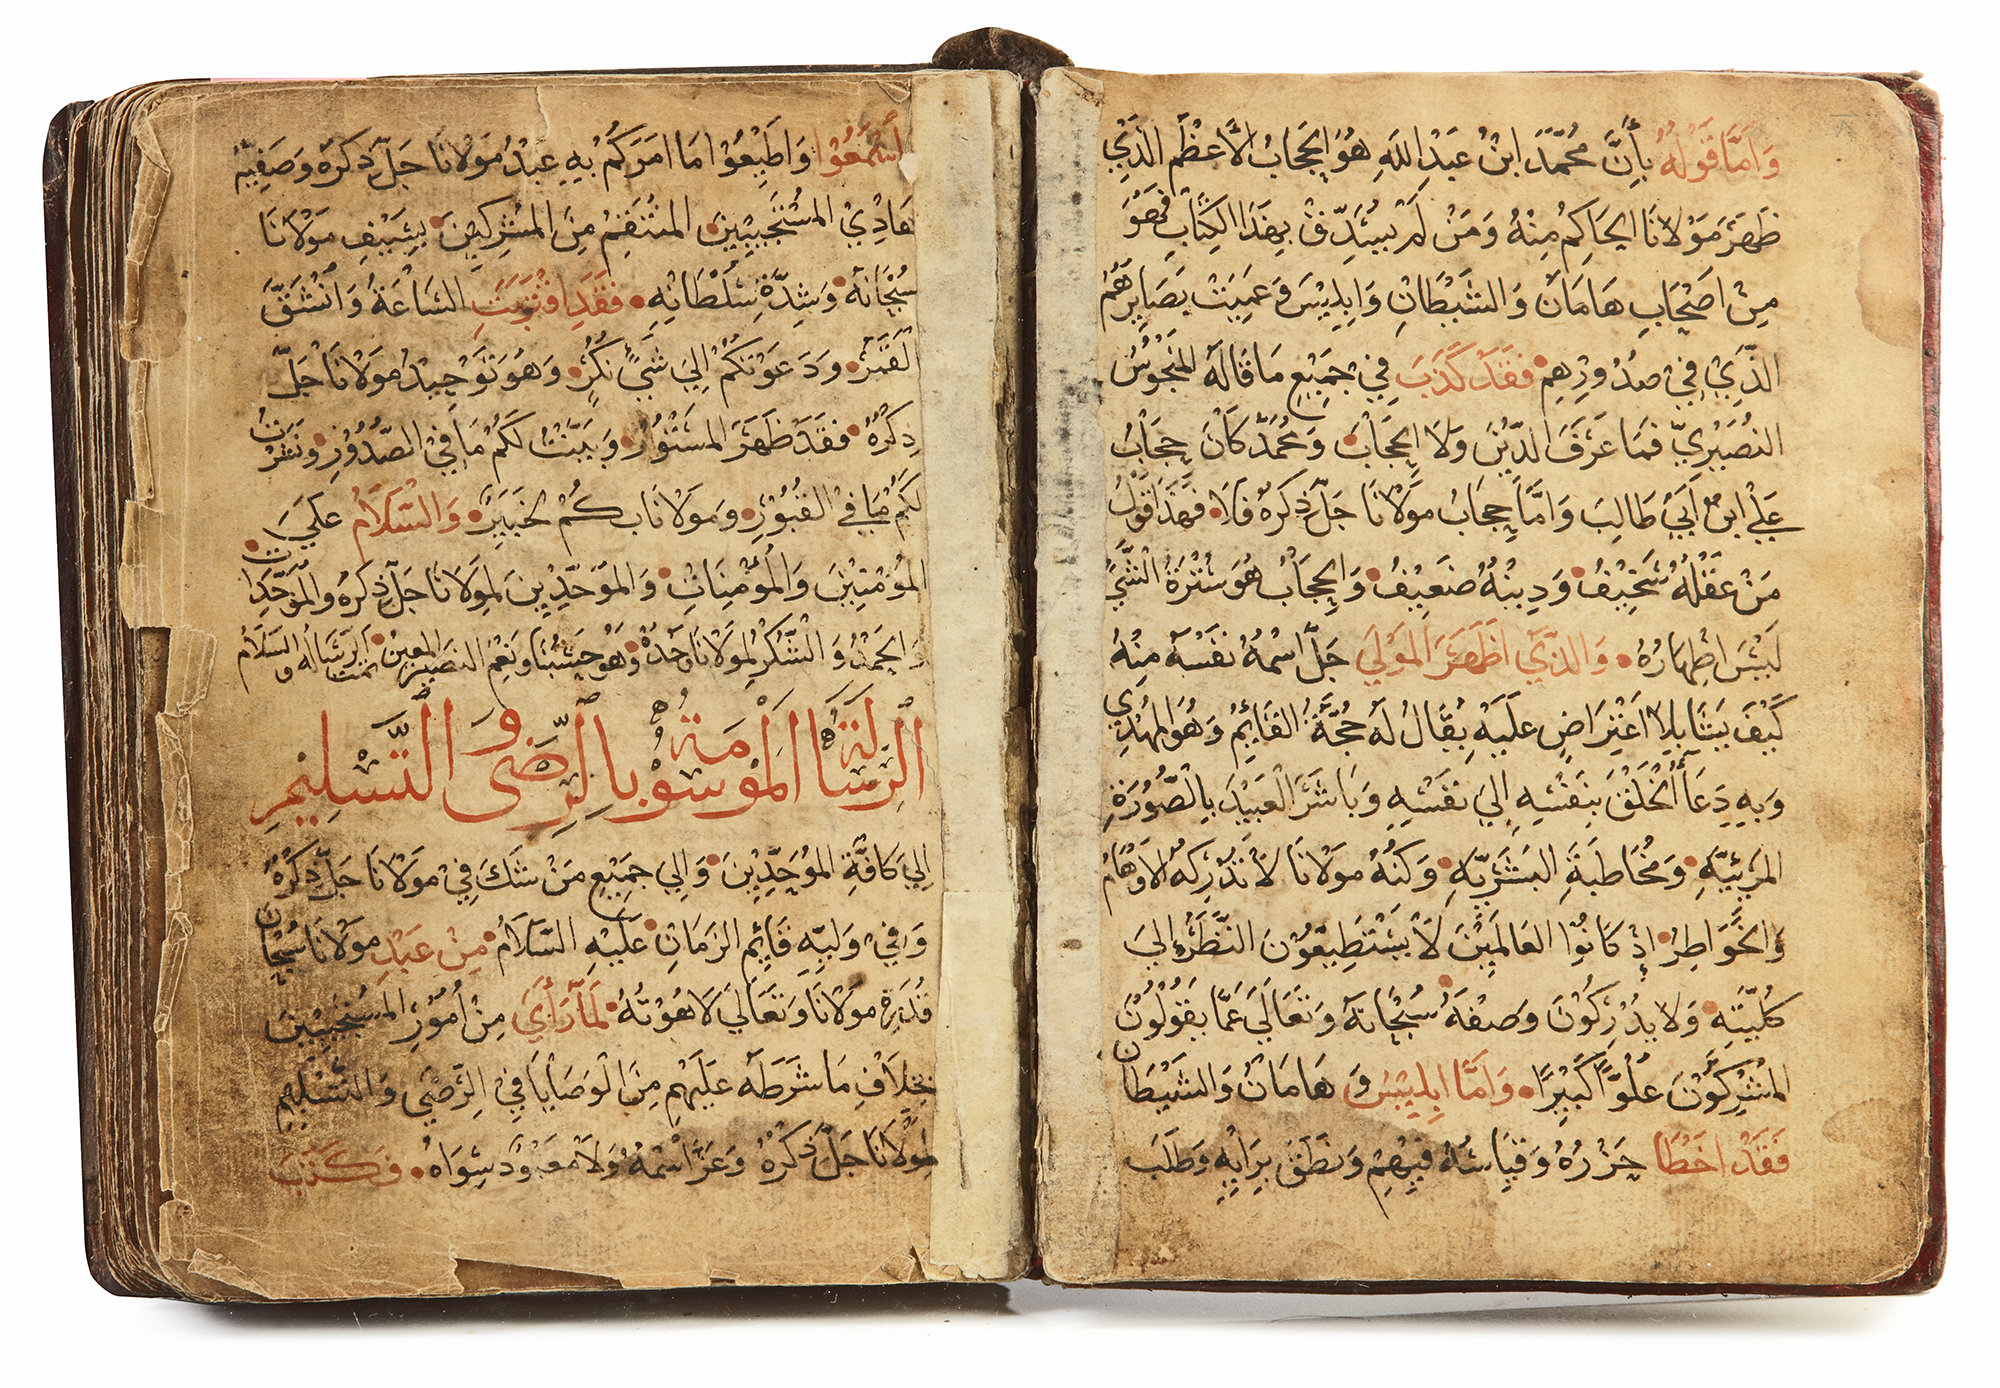 A COLLECTION OF MANUSCRIPT LETTERS (ALRASAYIL ALDAAMIGHAH LIL FASIQ LIL DUREZ), SYRIA, 14TH CENTURY - Image 2 of 5